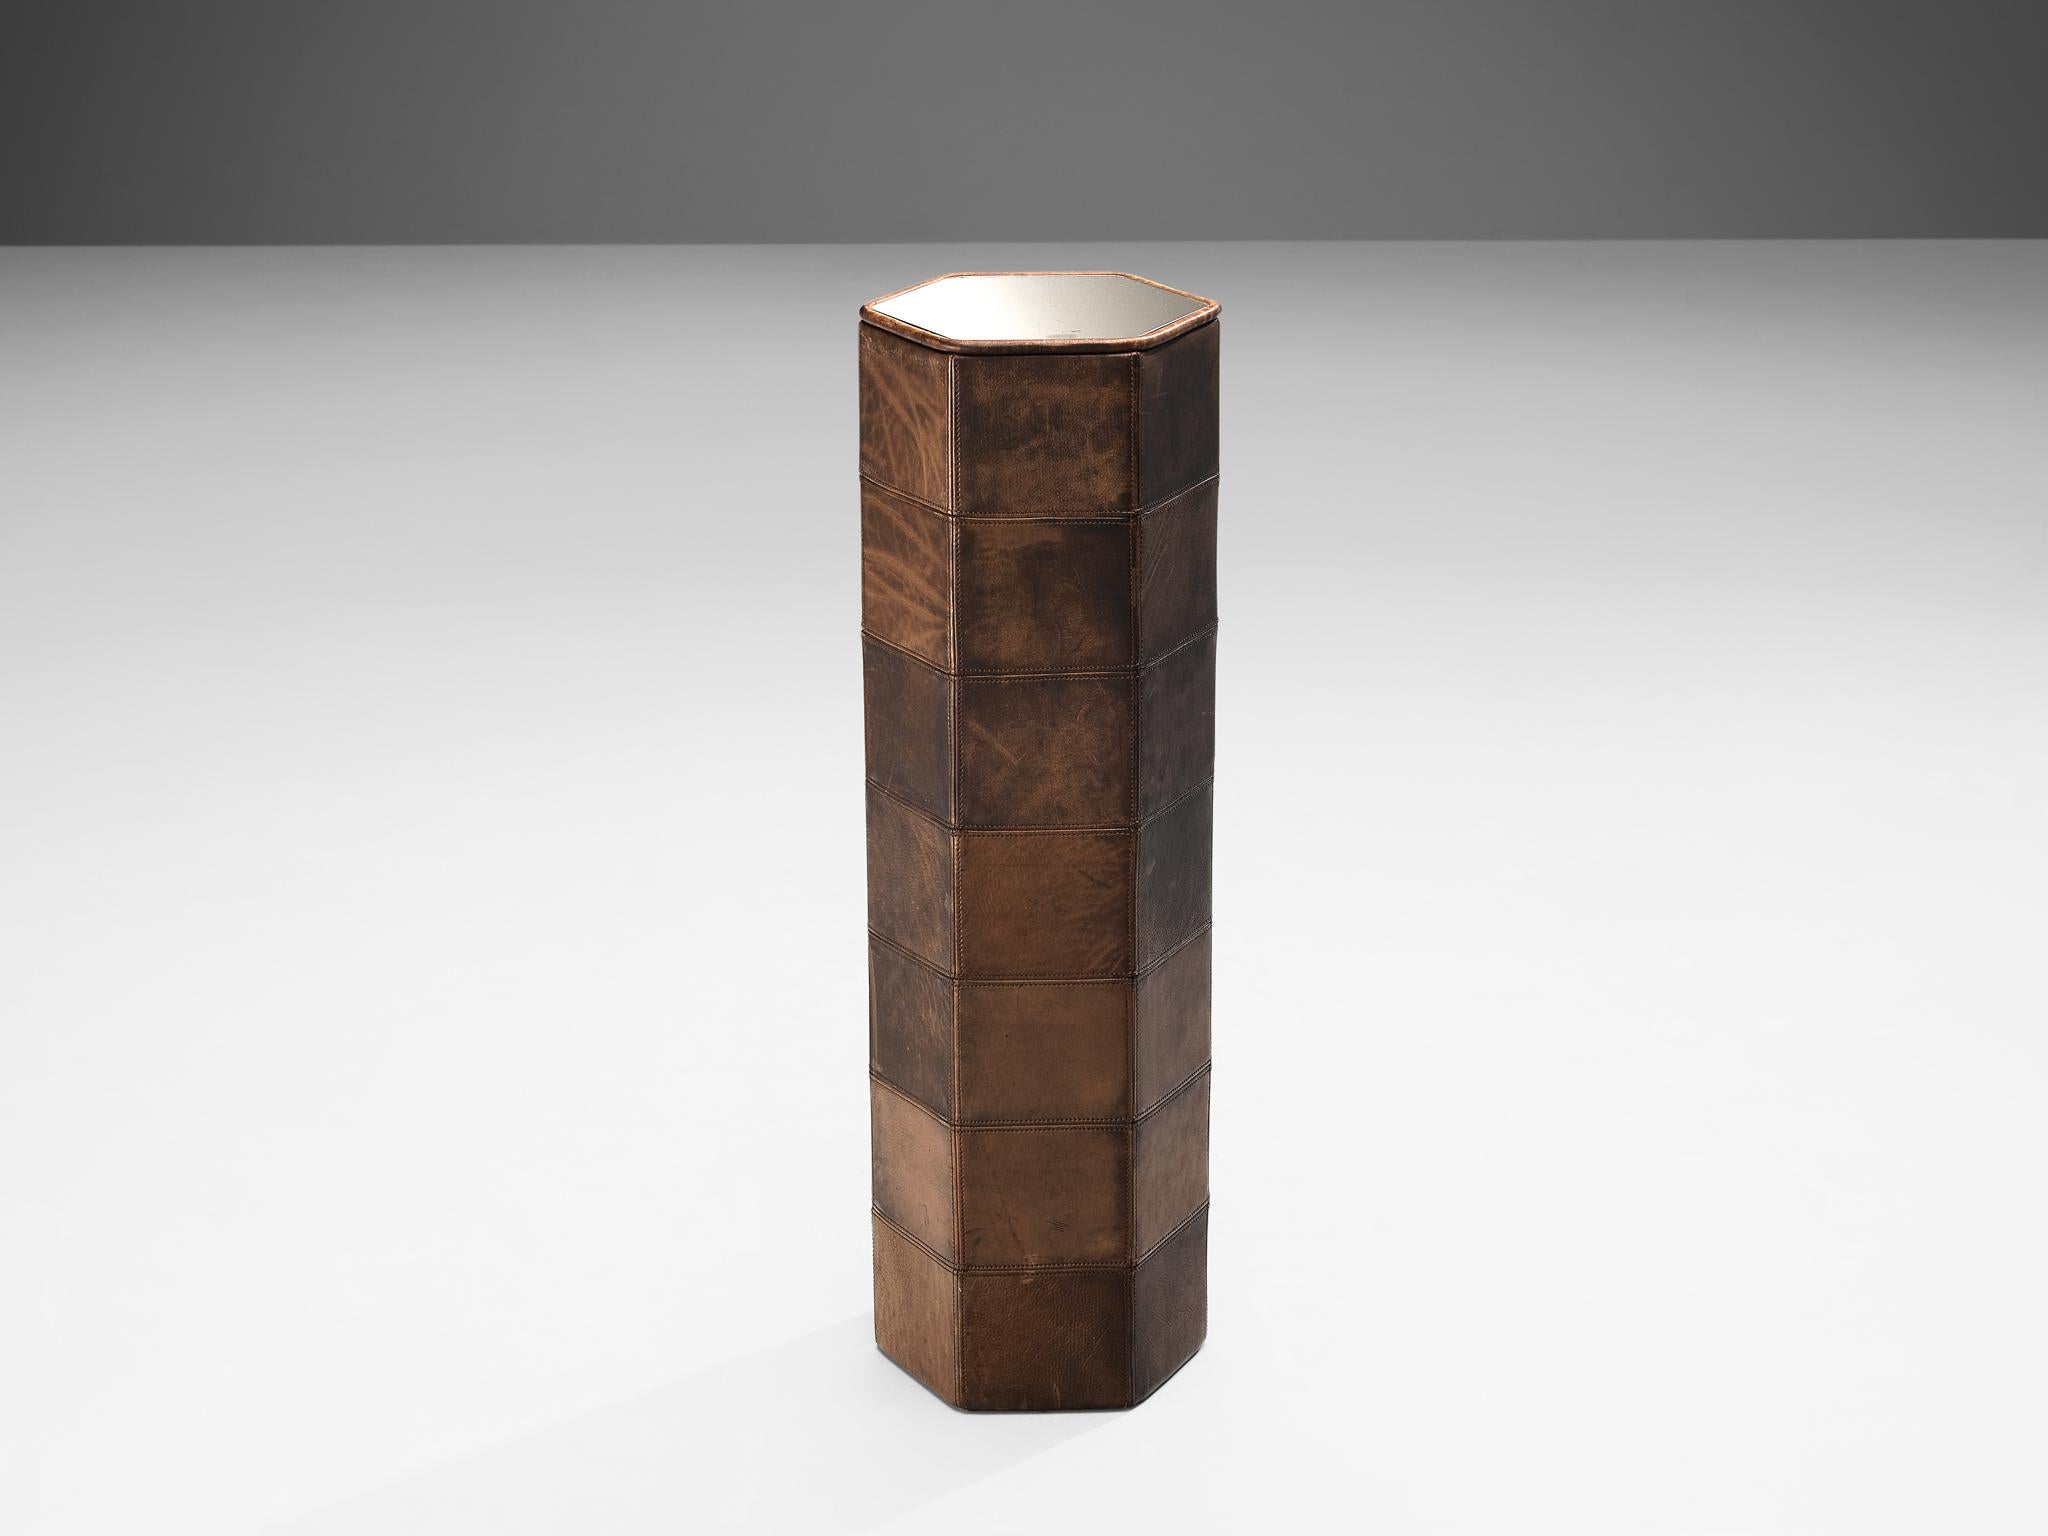 Column or side table, leather, mirror, Europe, 1980s

Decorative column made in patchwork leather and mirrored top. This piece was made in Europe in the 1980s, and shows post modern characteristics. The leather used to wrap the column is in brown